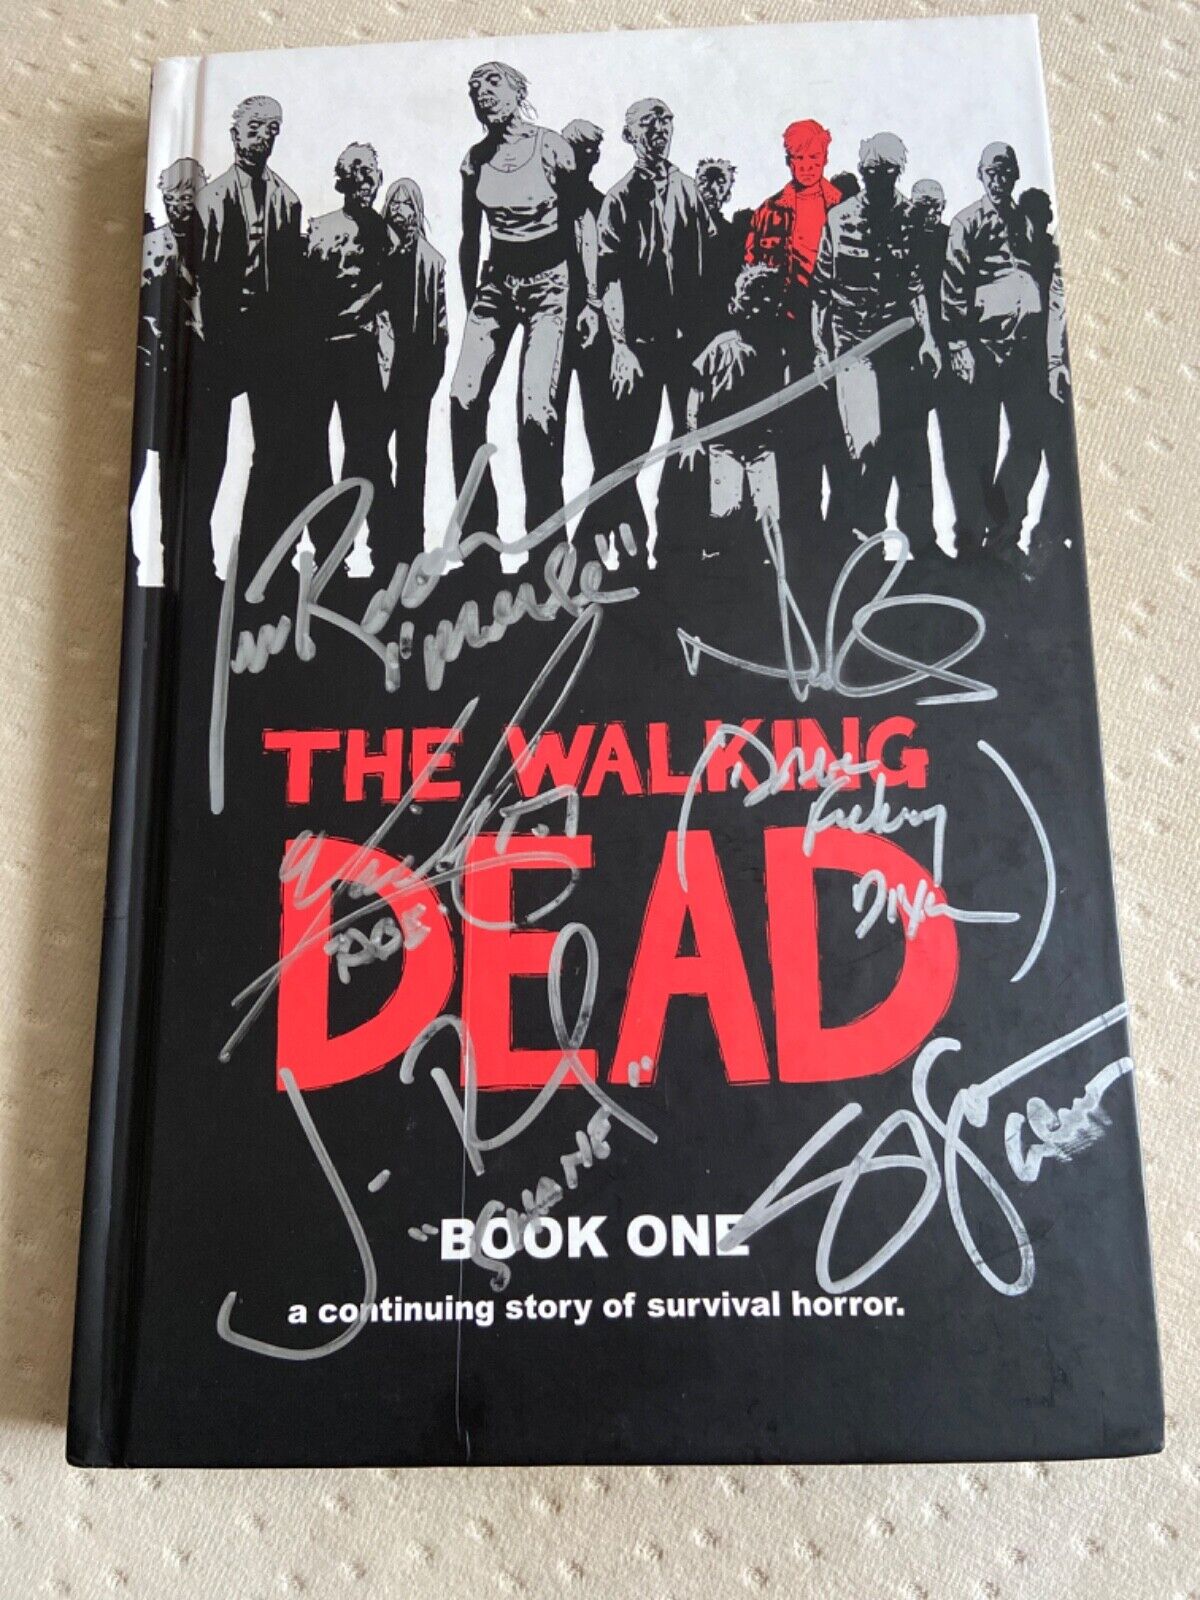 The Walking Dead Book #1 (Image Comics, 2006) autographed by 5 characters